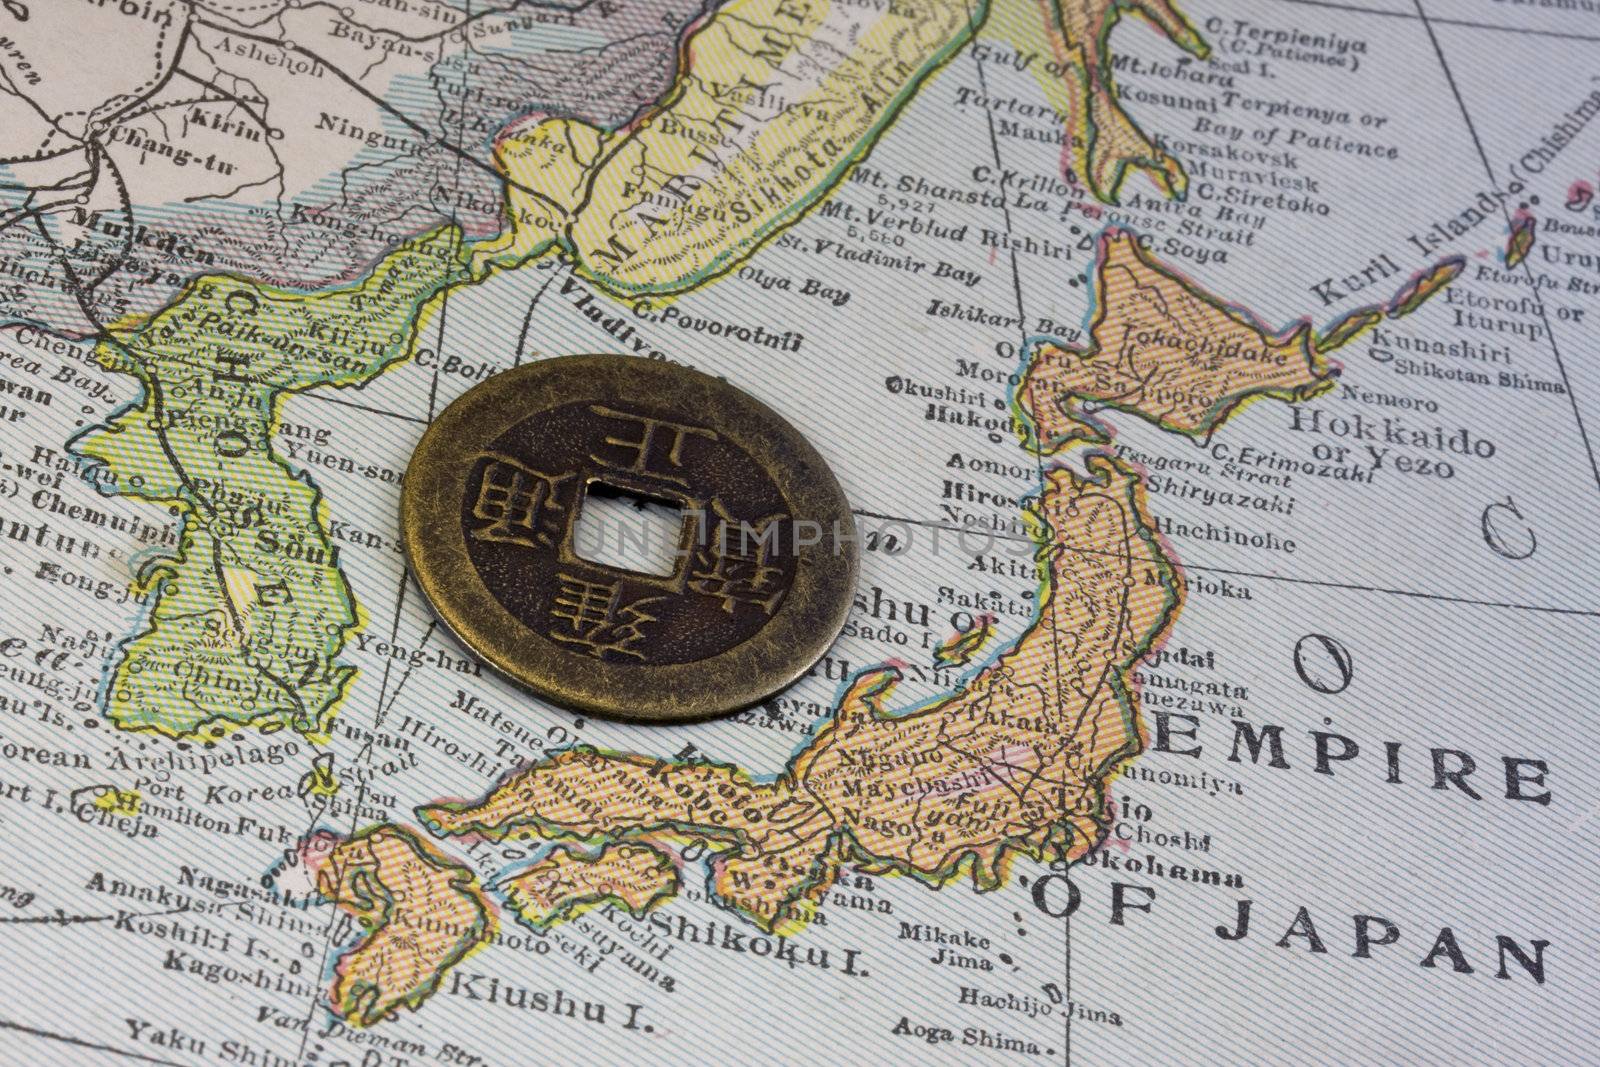 Empire of Japan on a vintage map (1926) and old Japanese coin with square hole